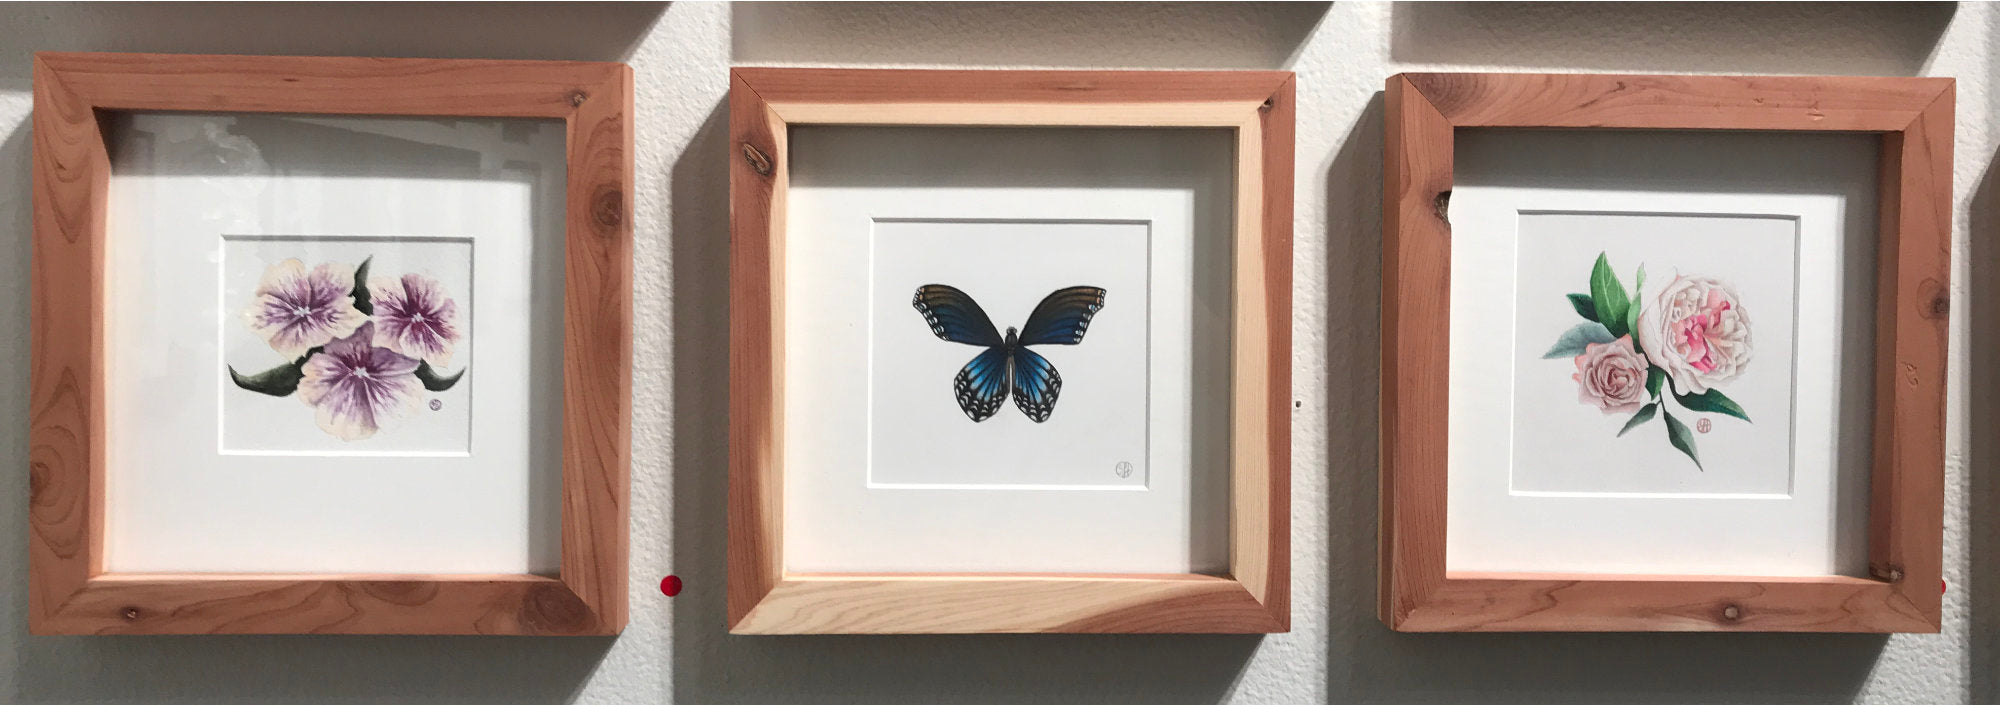 framed artworks of butterfly and flowers